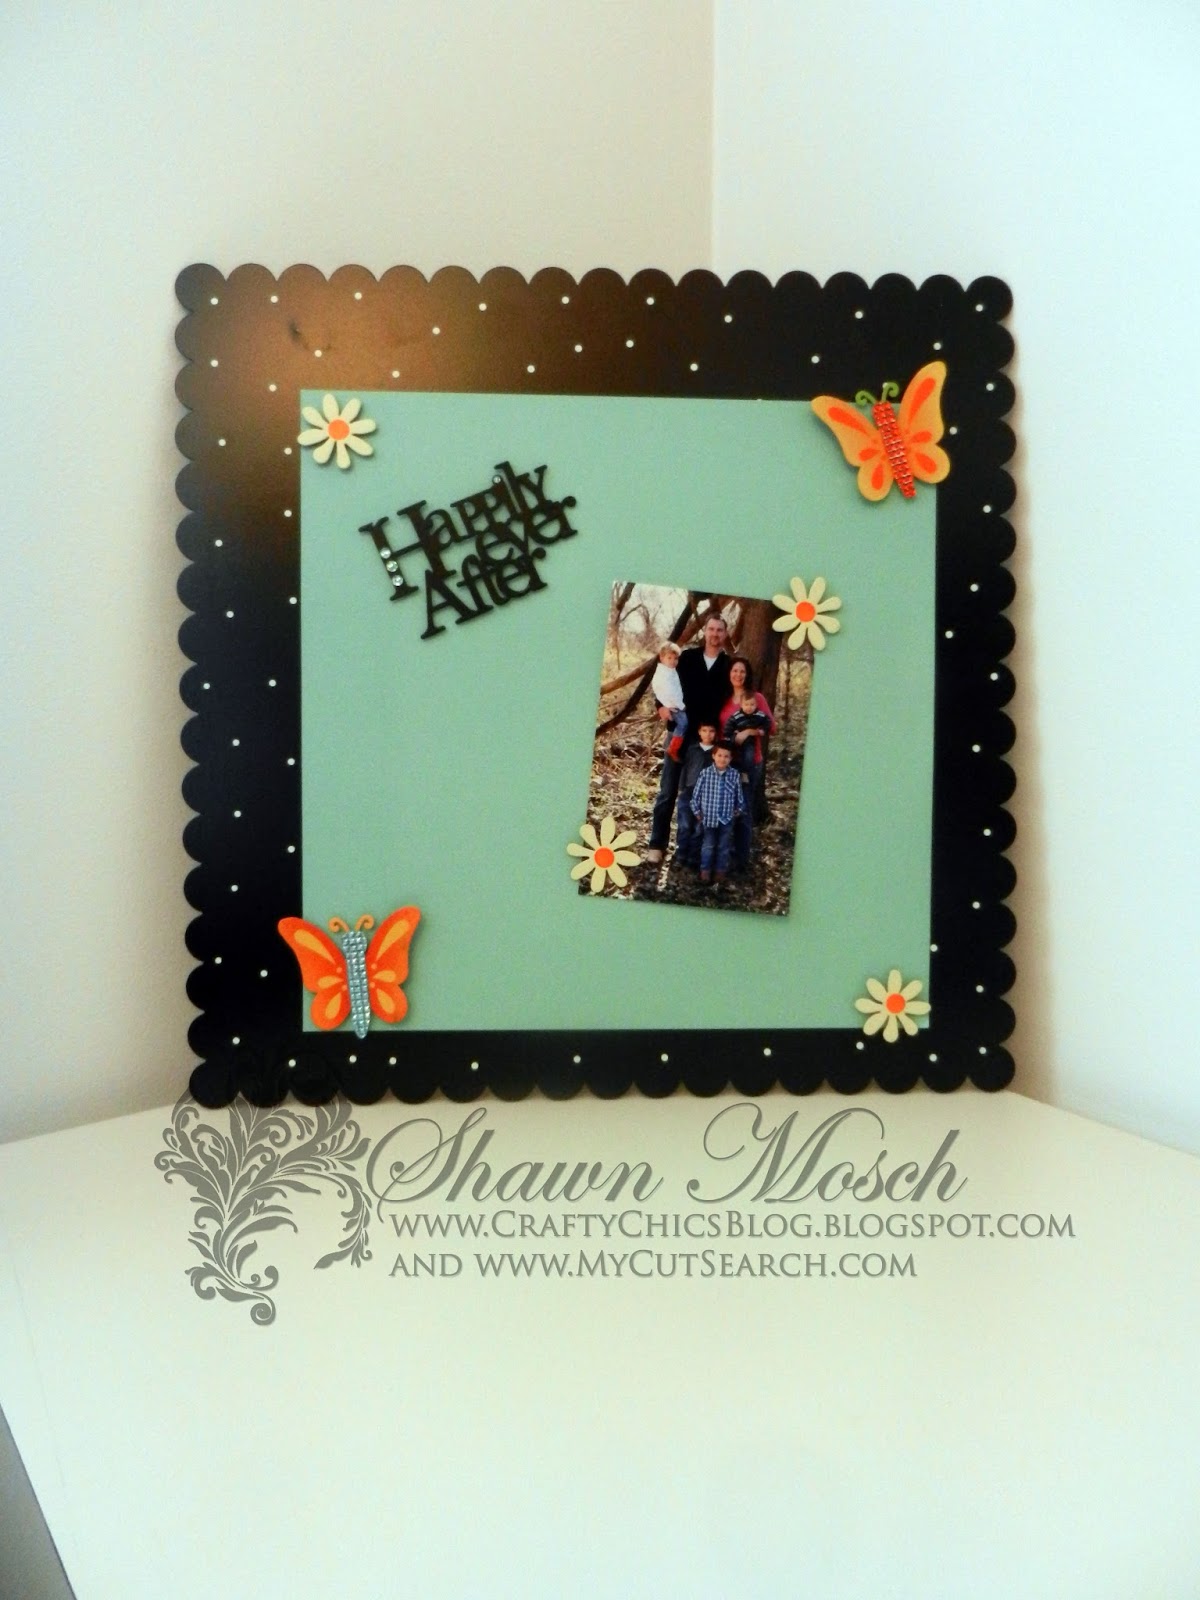 Easy DIY Magnets with Printable Magnet Sheets - Shawn Mosch